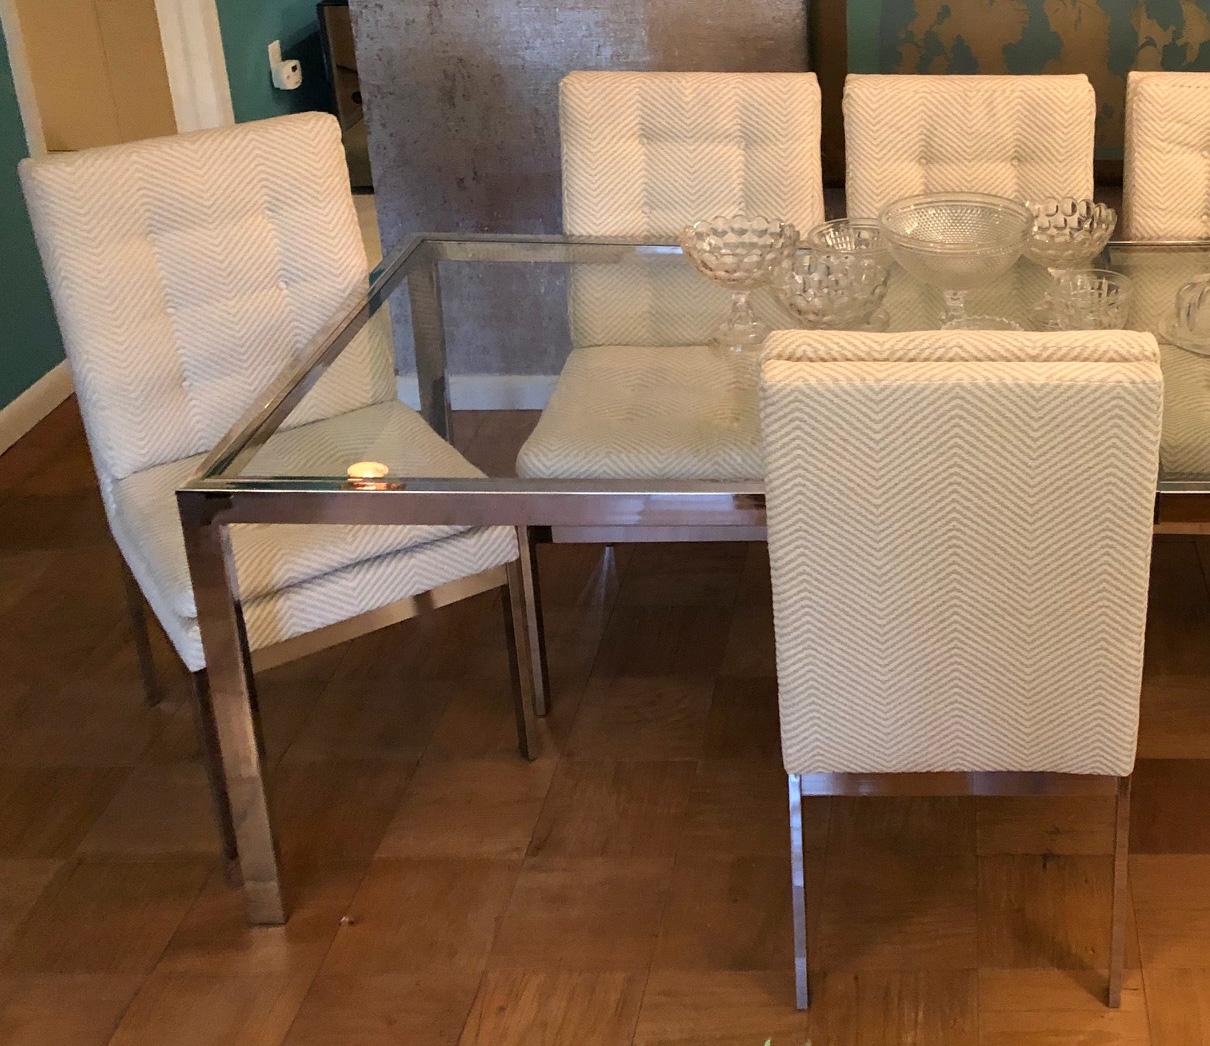 Incredible, set of six, 1970s Milo Baughman for the Design Institute of America mirror-finish chrome dining chairs, newly reupholstered in Thibaut Peak Herringbone-Straw cotton blend fabric. Each chair, 25